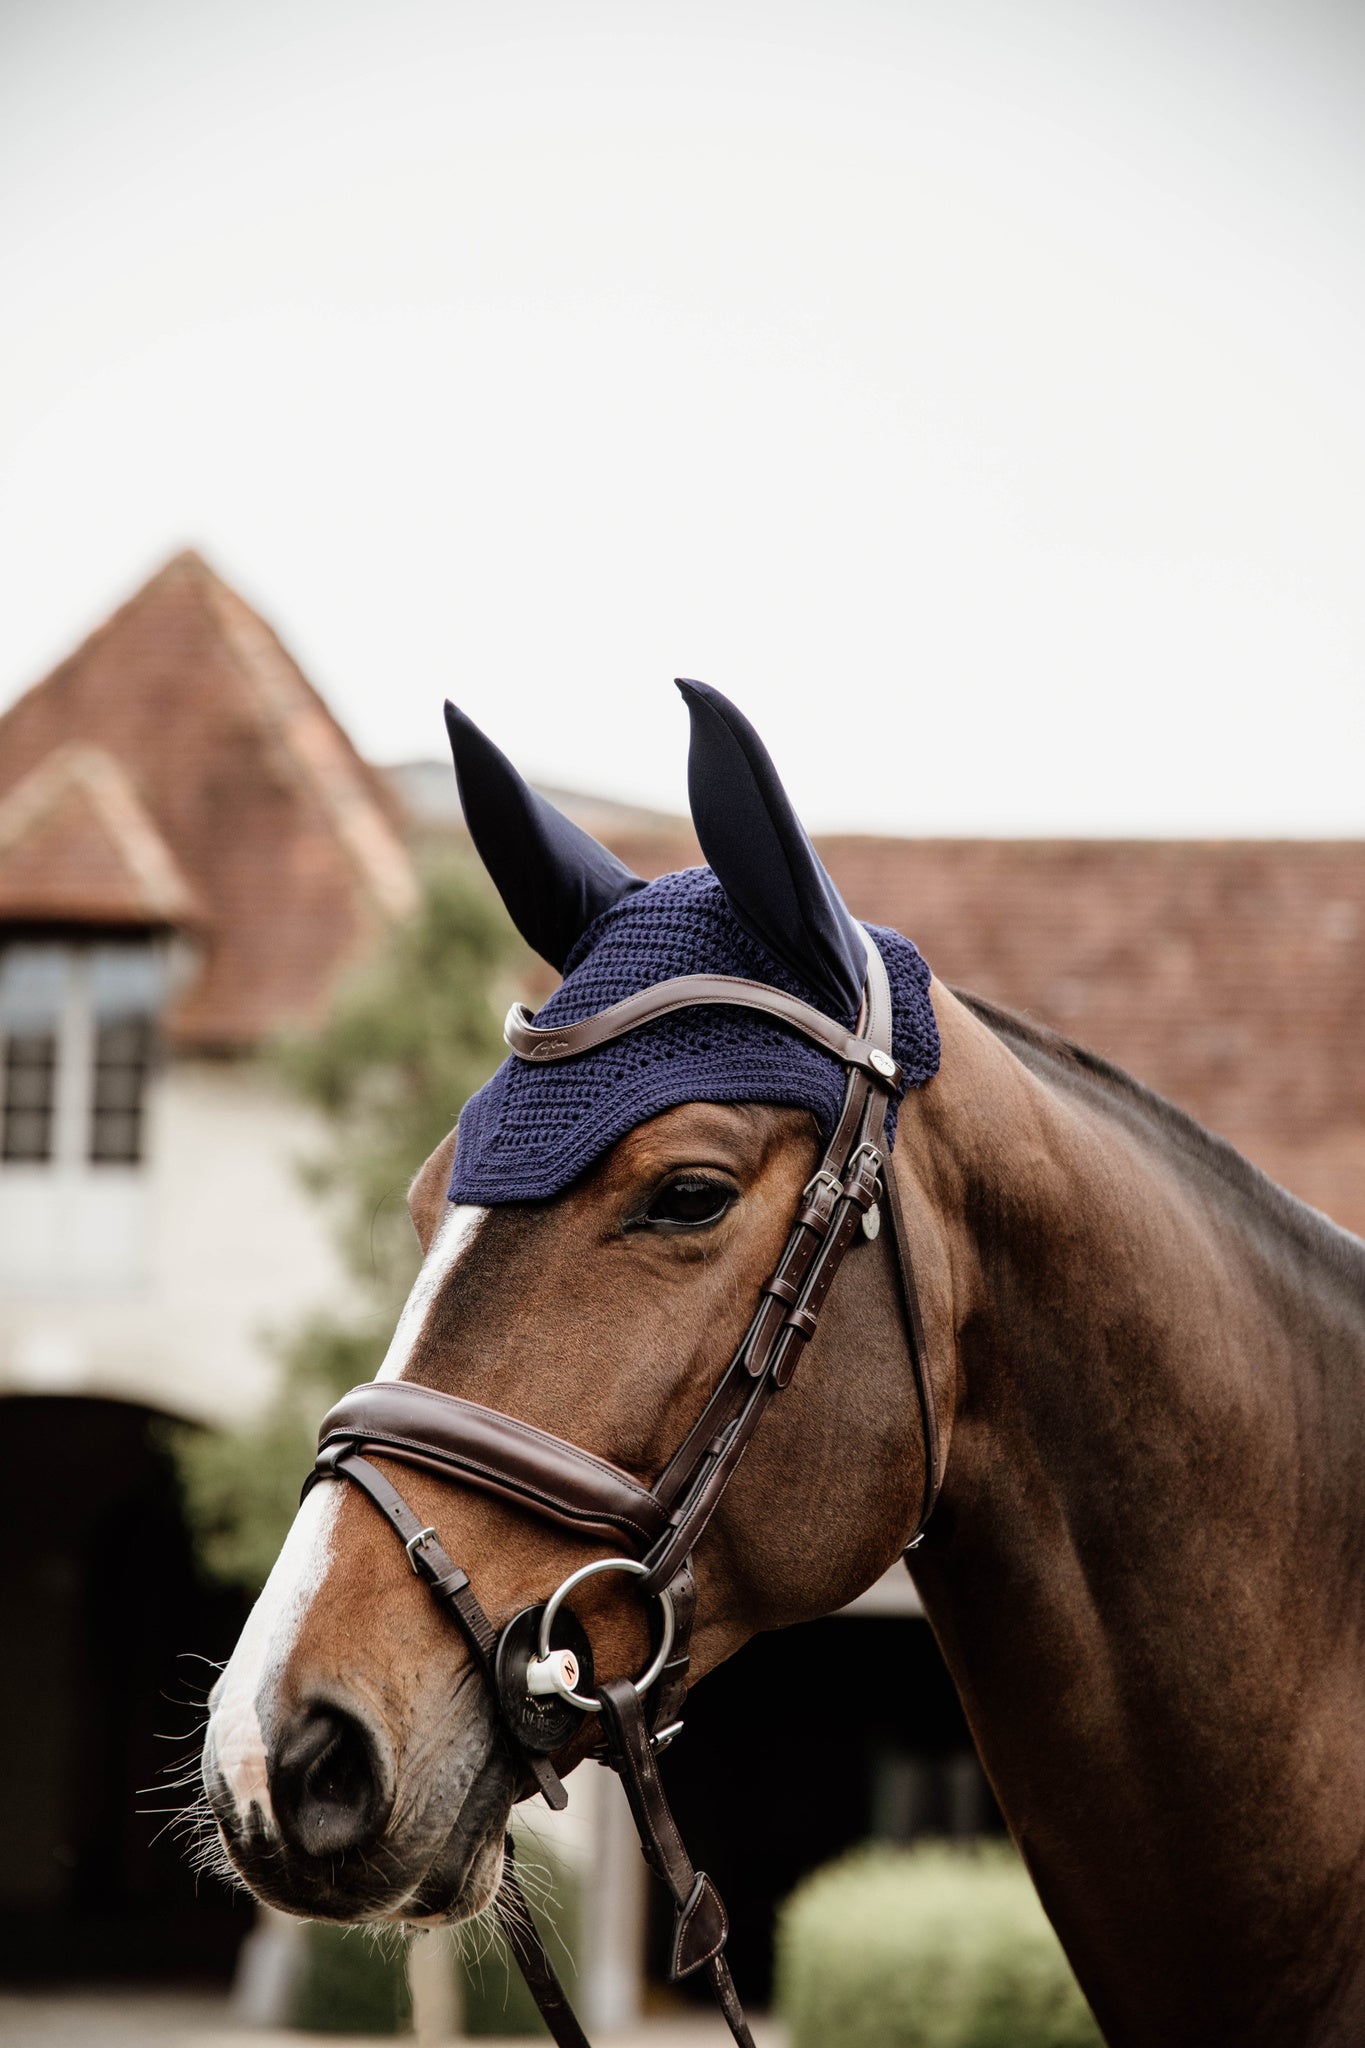 The Kentucky fly veil in the classic Wellington design with the square front. Perfect for a more understated look.